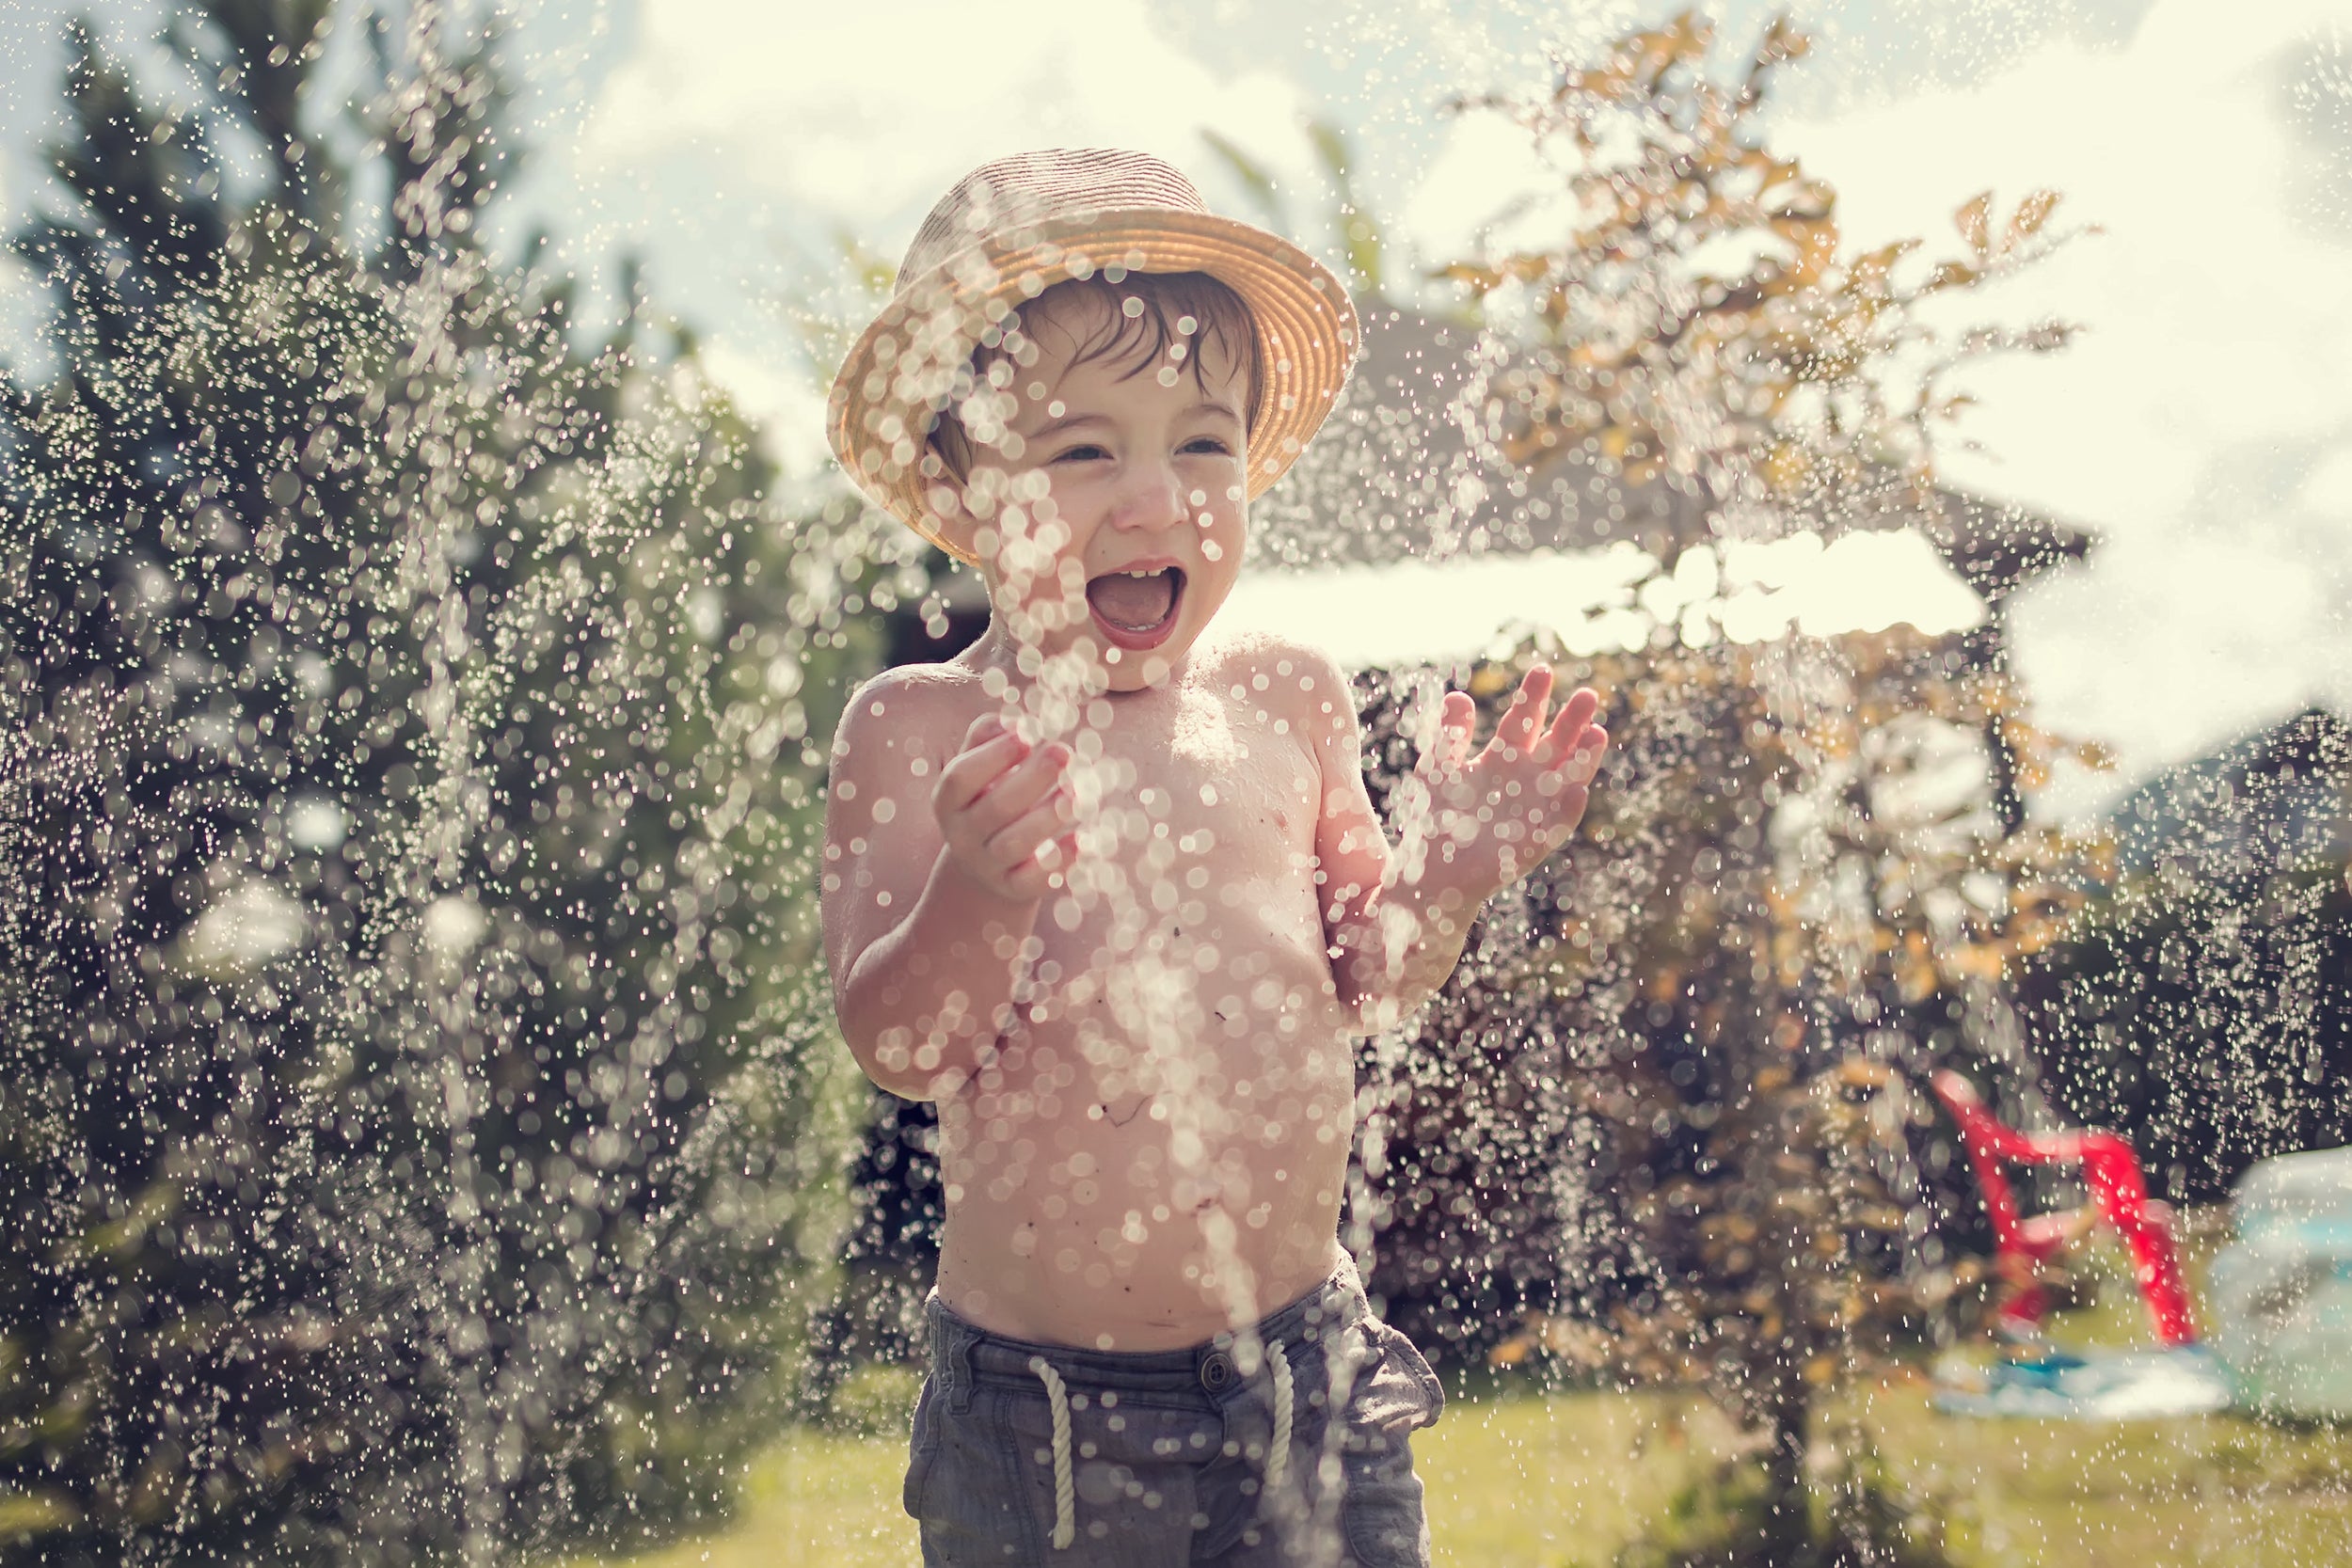 Beat The Heat With These Fun Summertime Activities